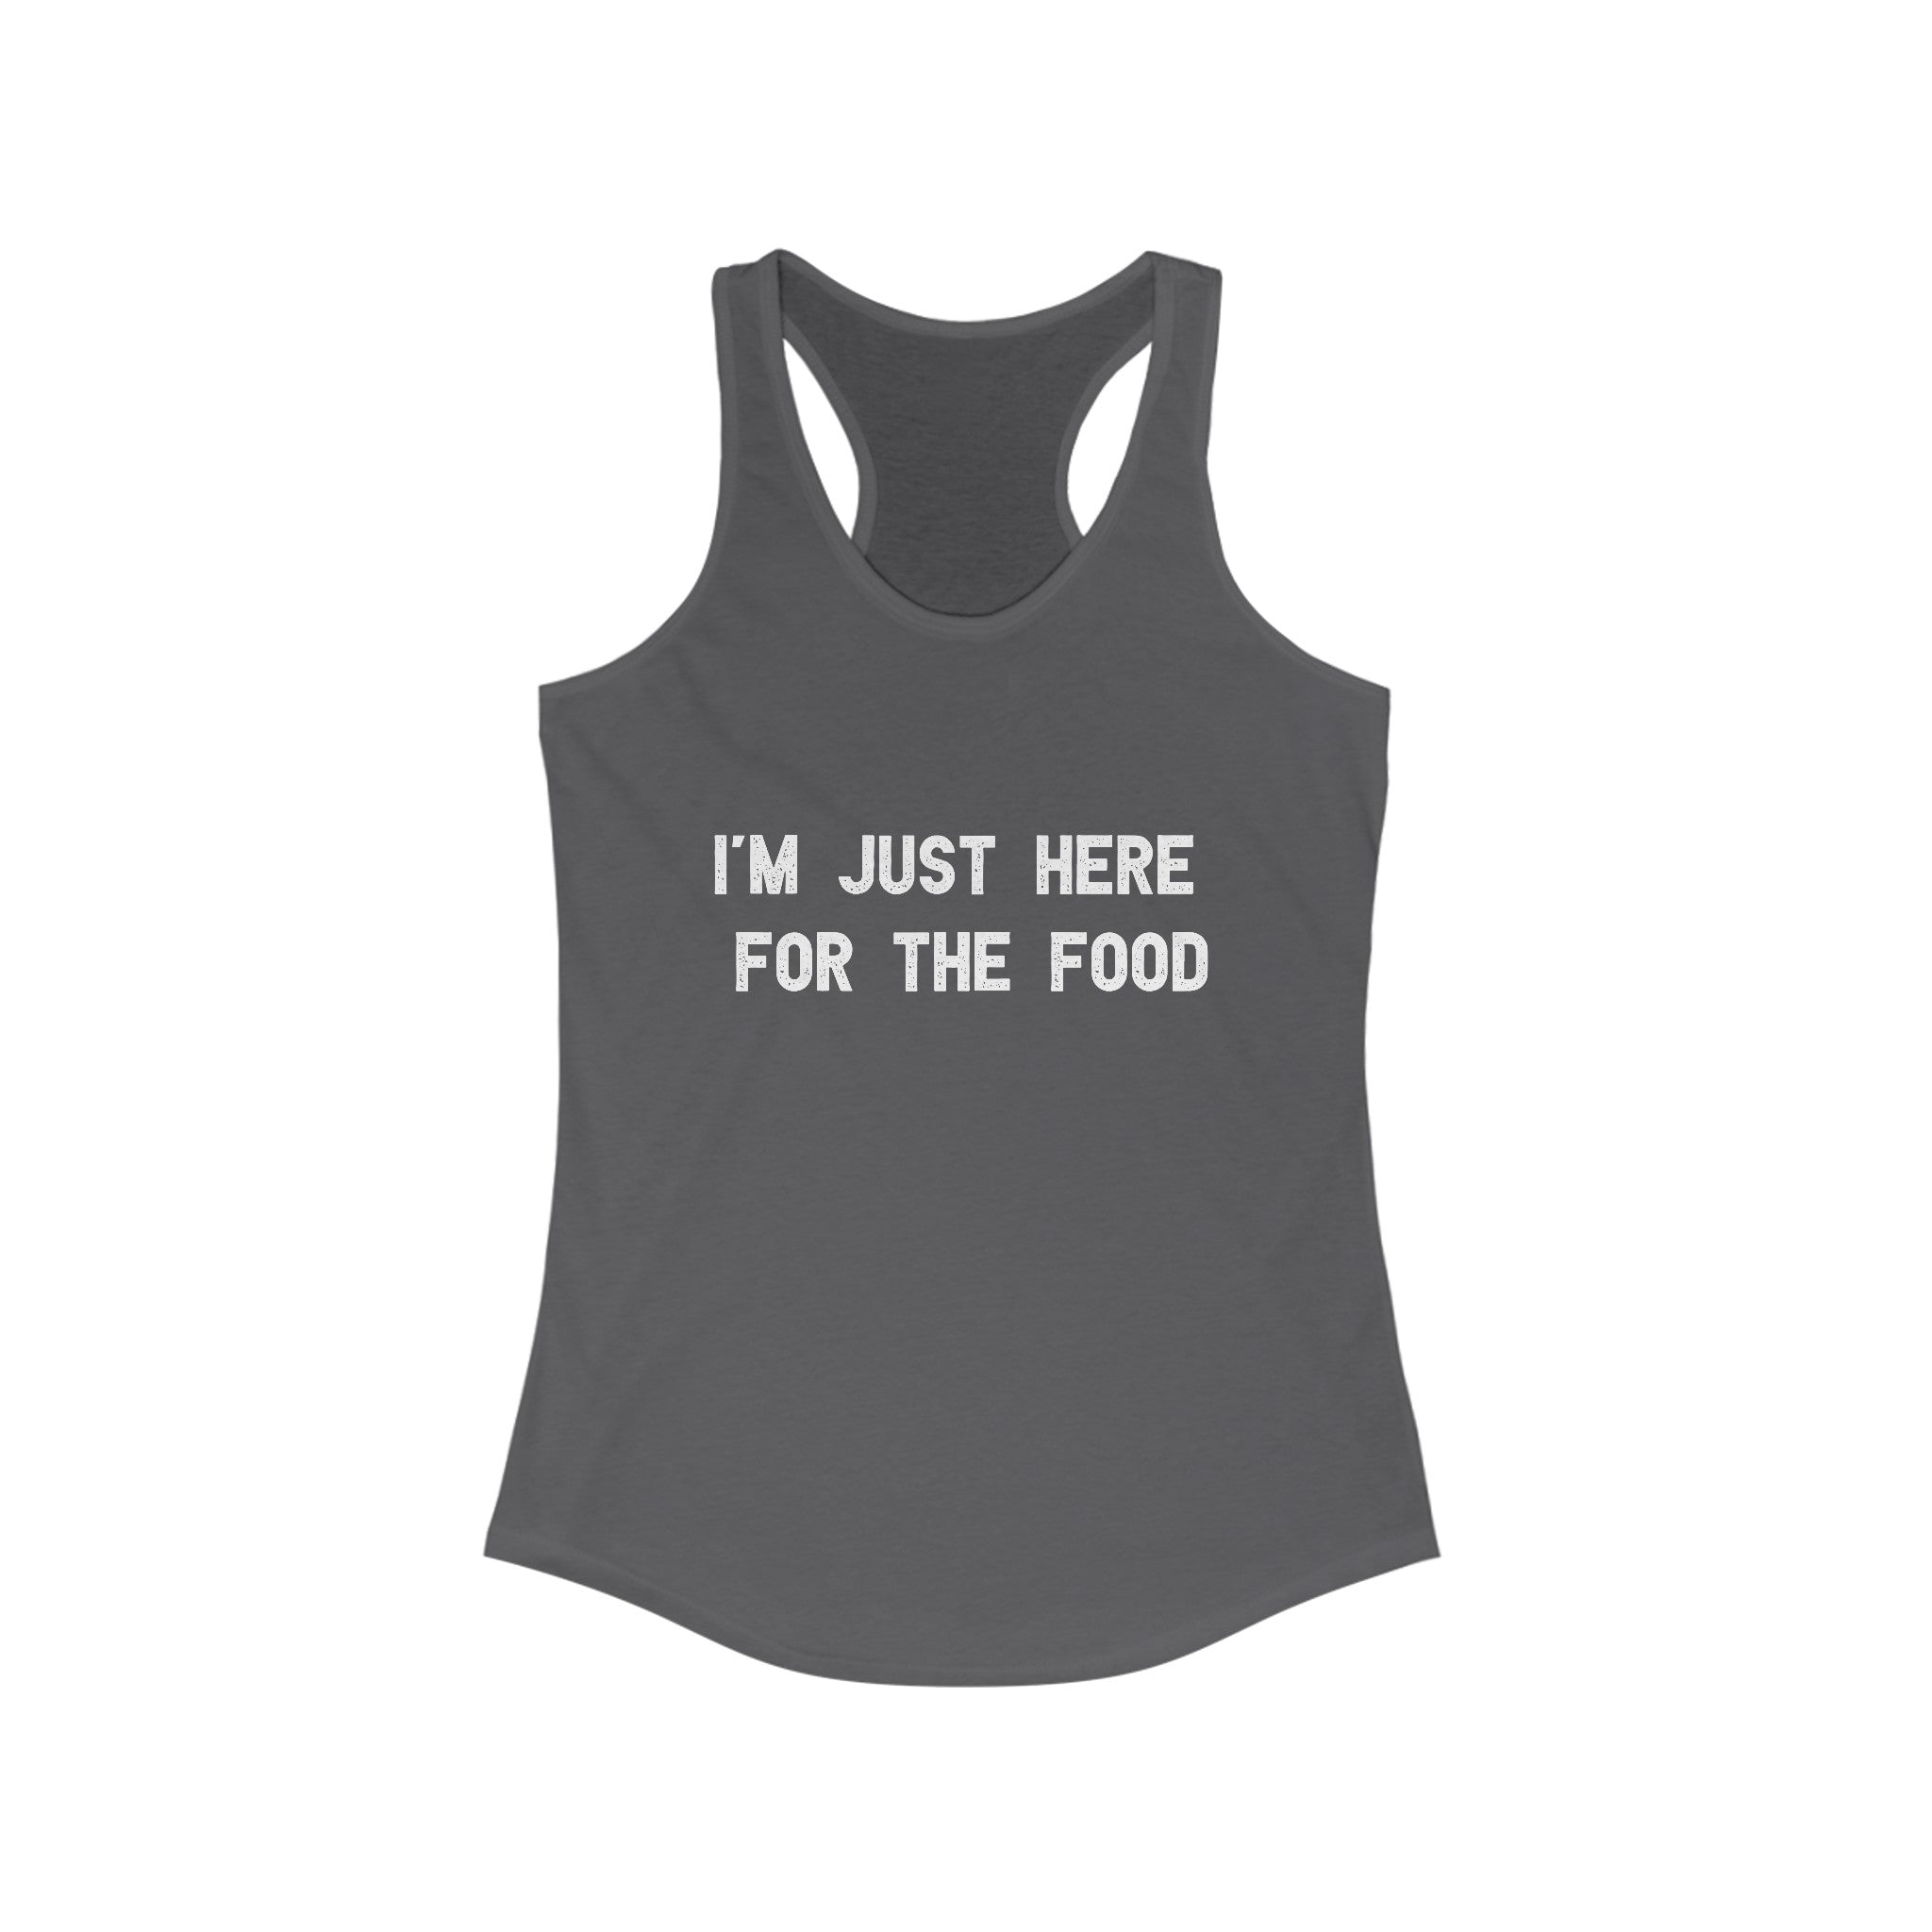 I'm Just Here For The Food - Women's Racerback Tank